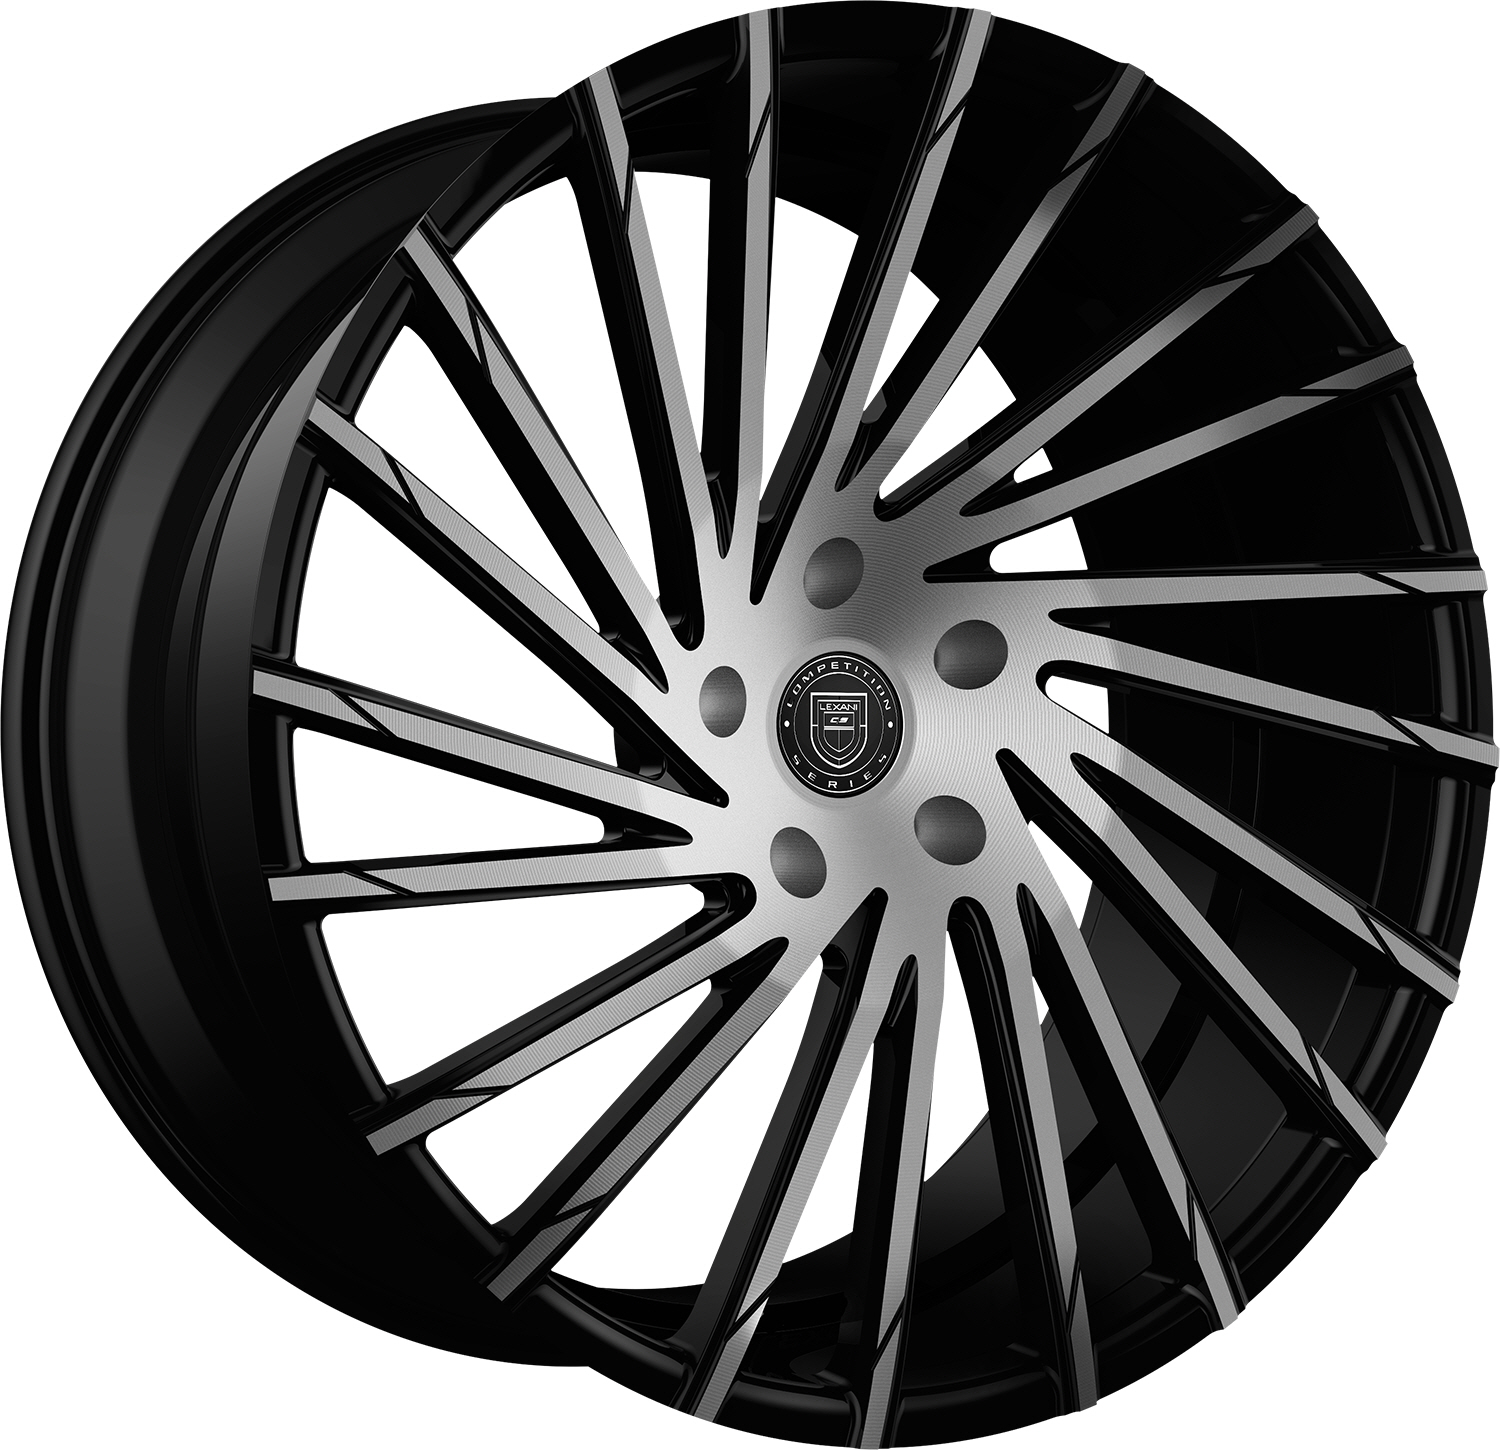 663 - WRAITH  WHEELS AND RIMS PACKAGES